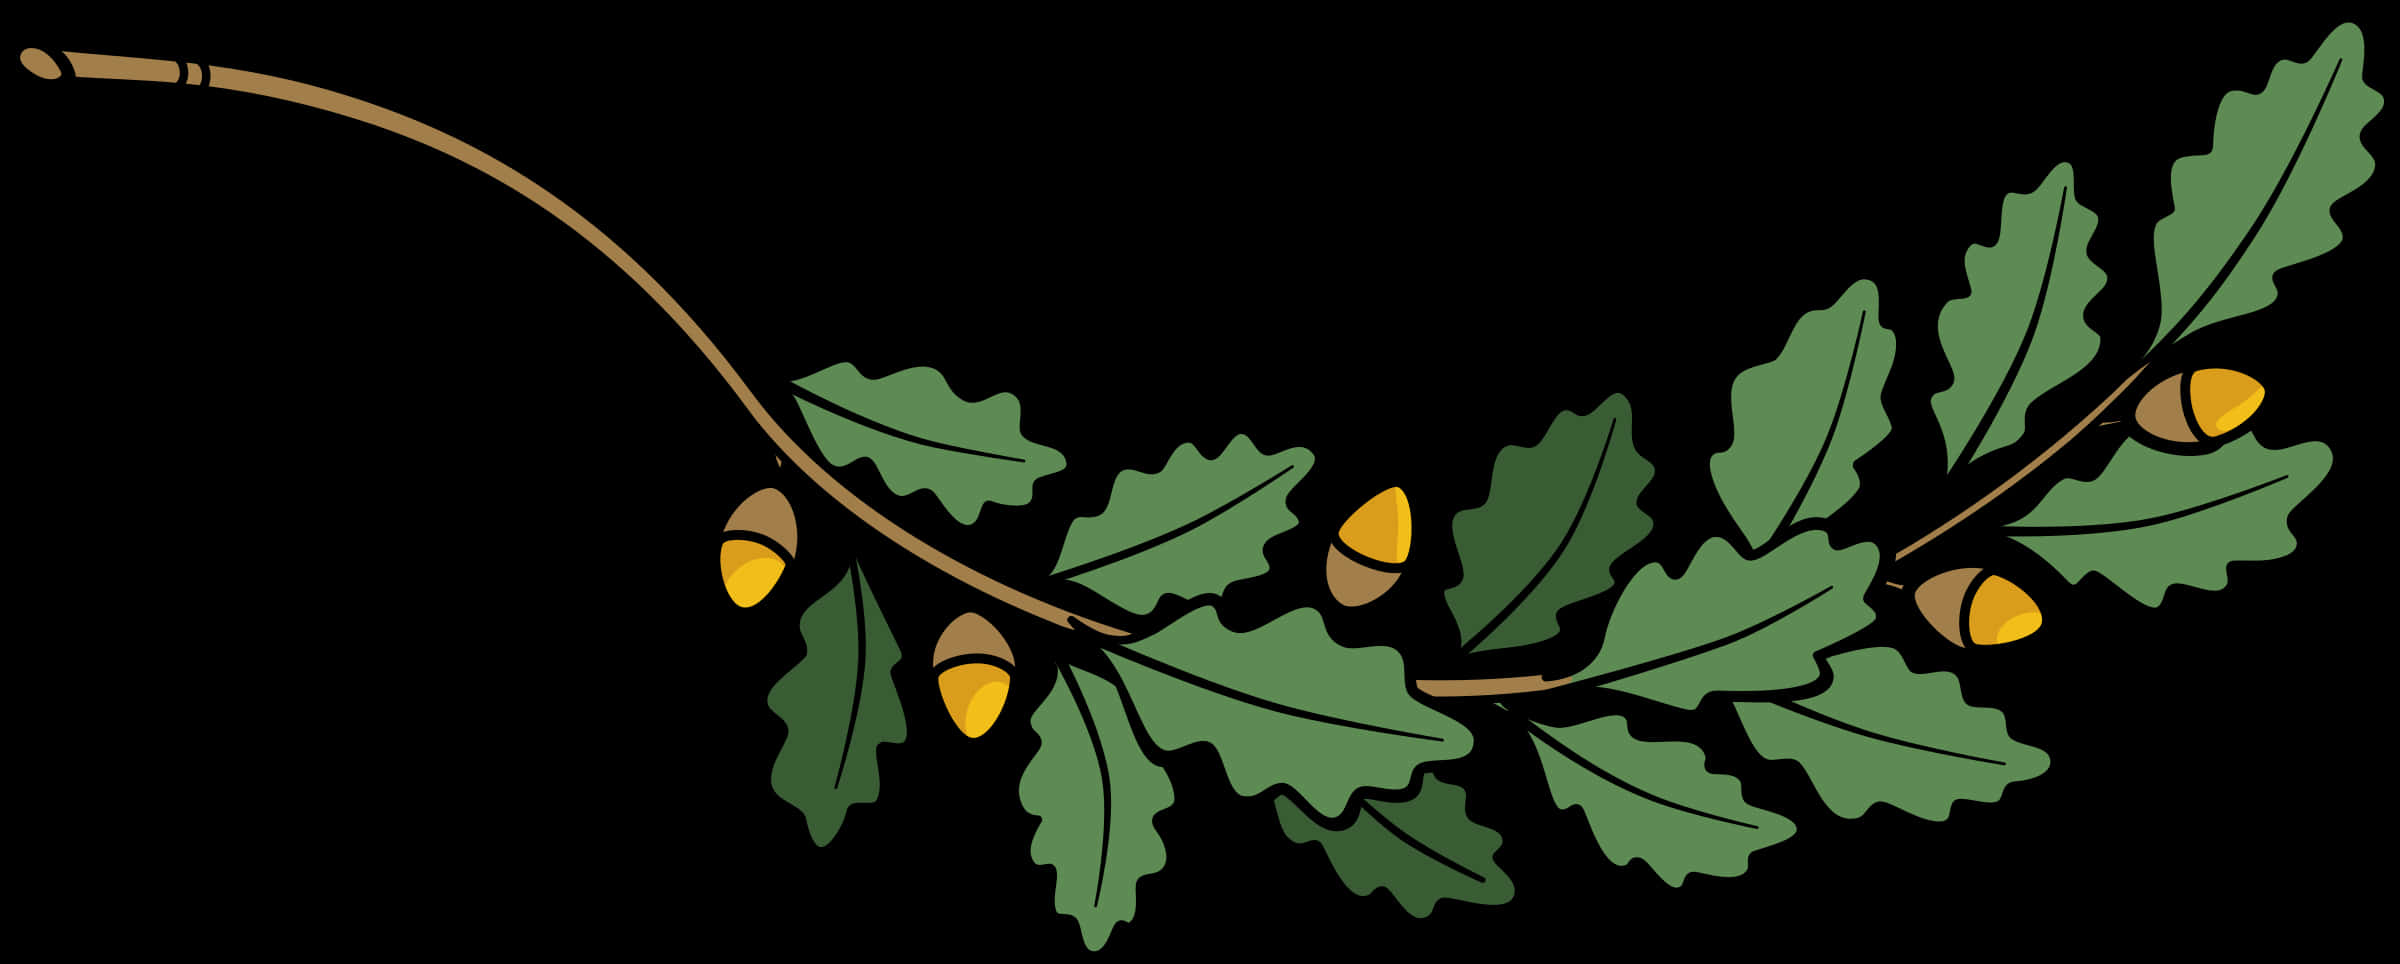 A Branch With Leaves And Acorns